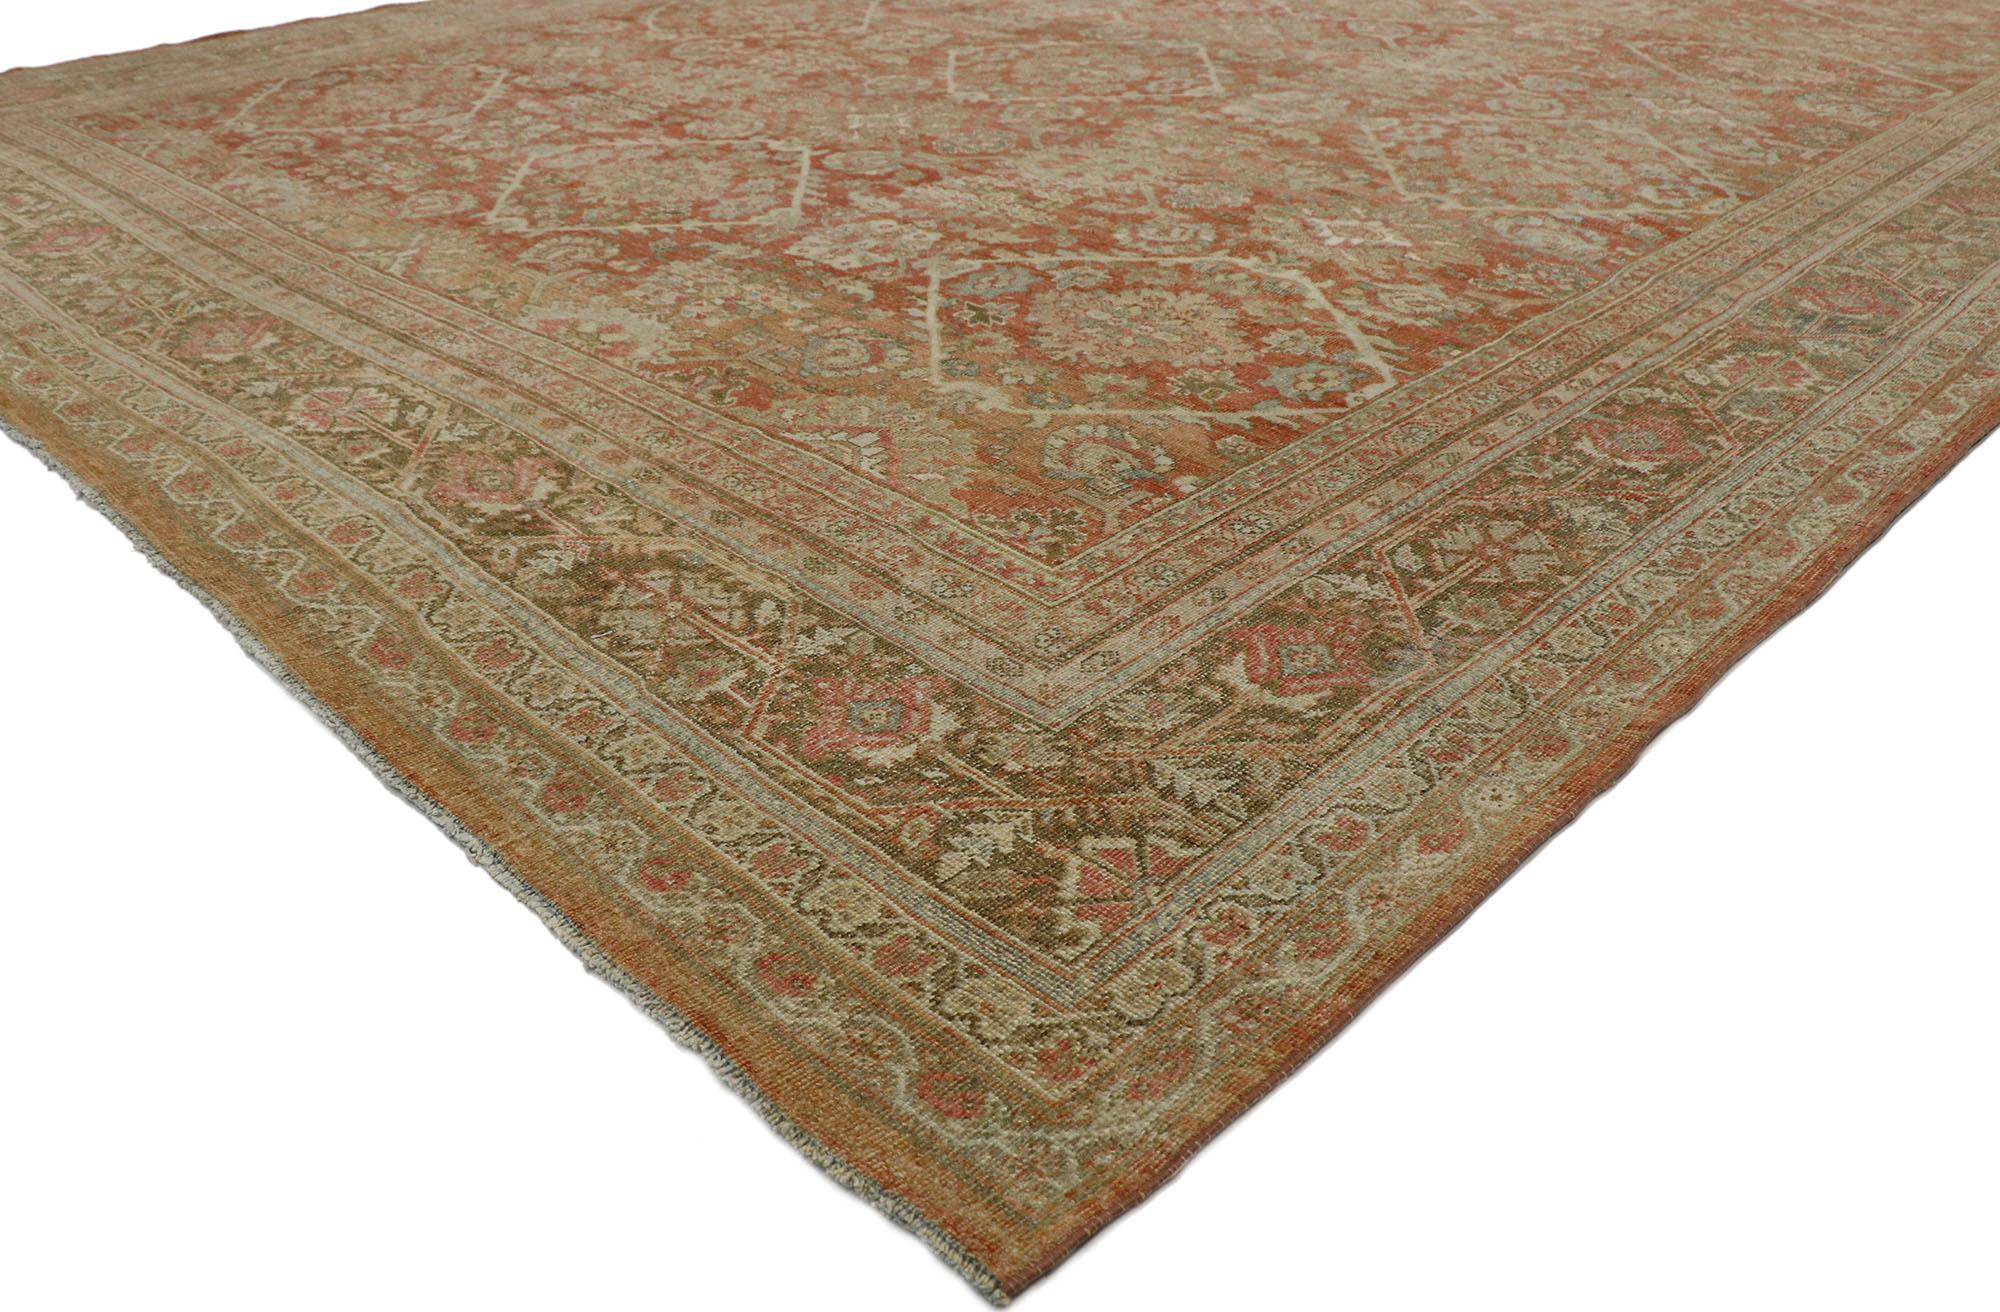 Hand-Knotted Distressed Antique Persian Mahal Rug with Rustic Spanish Mission Style